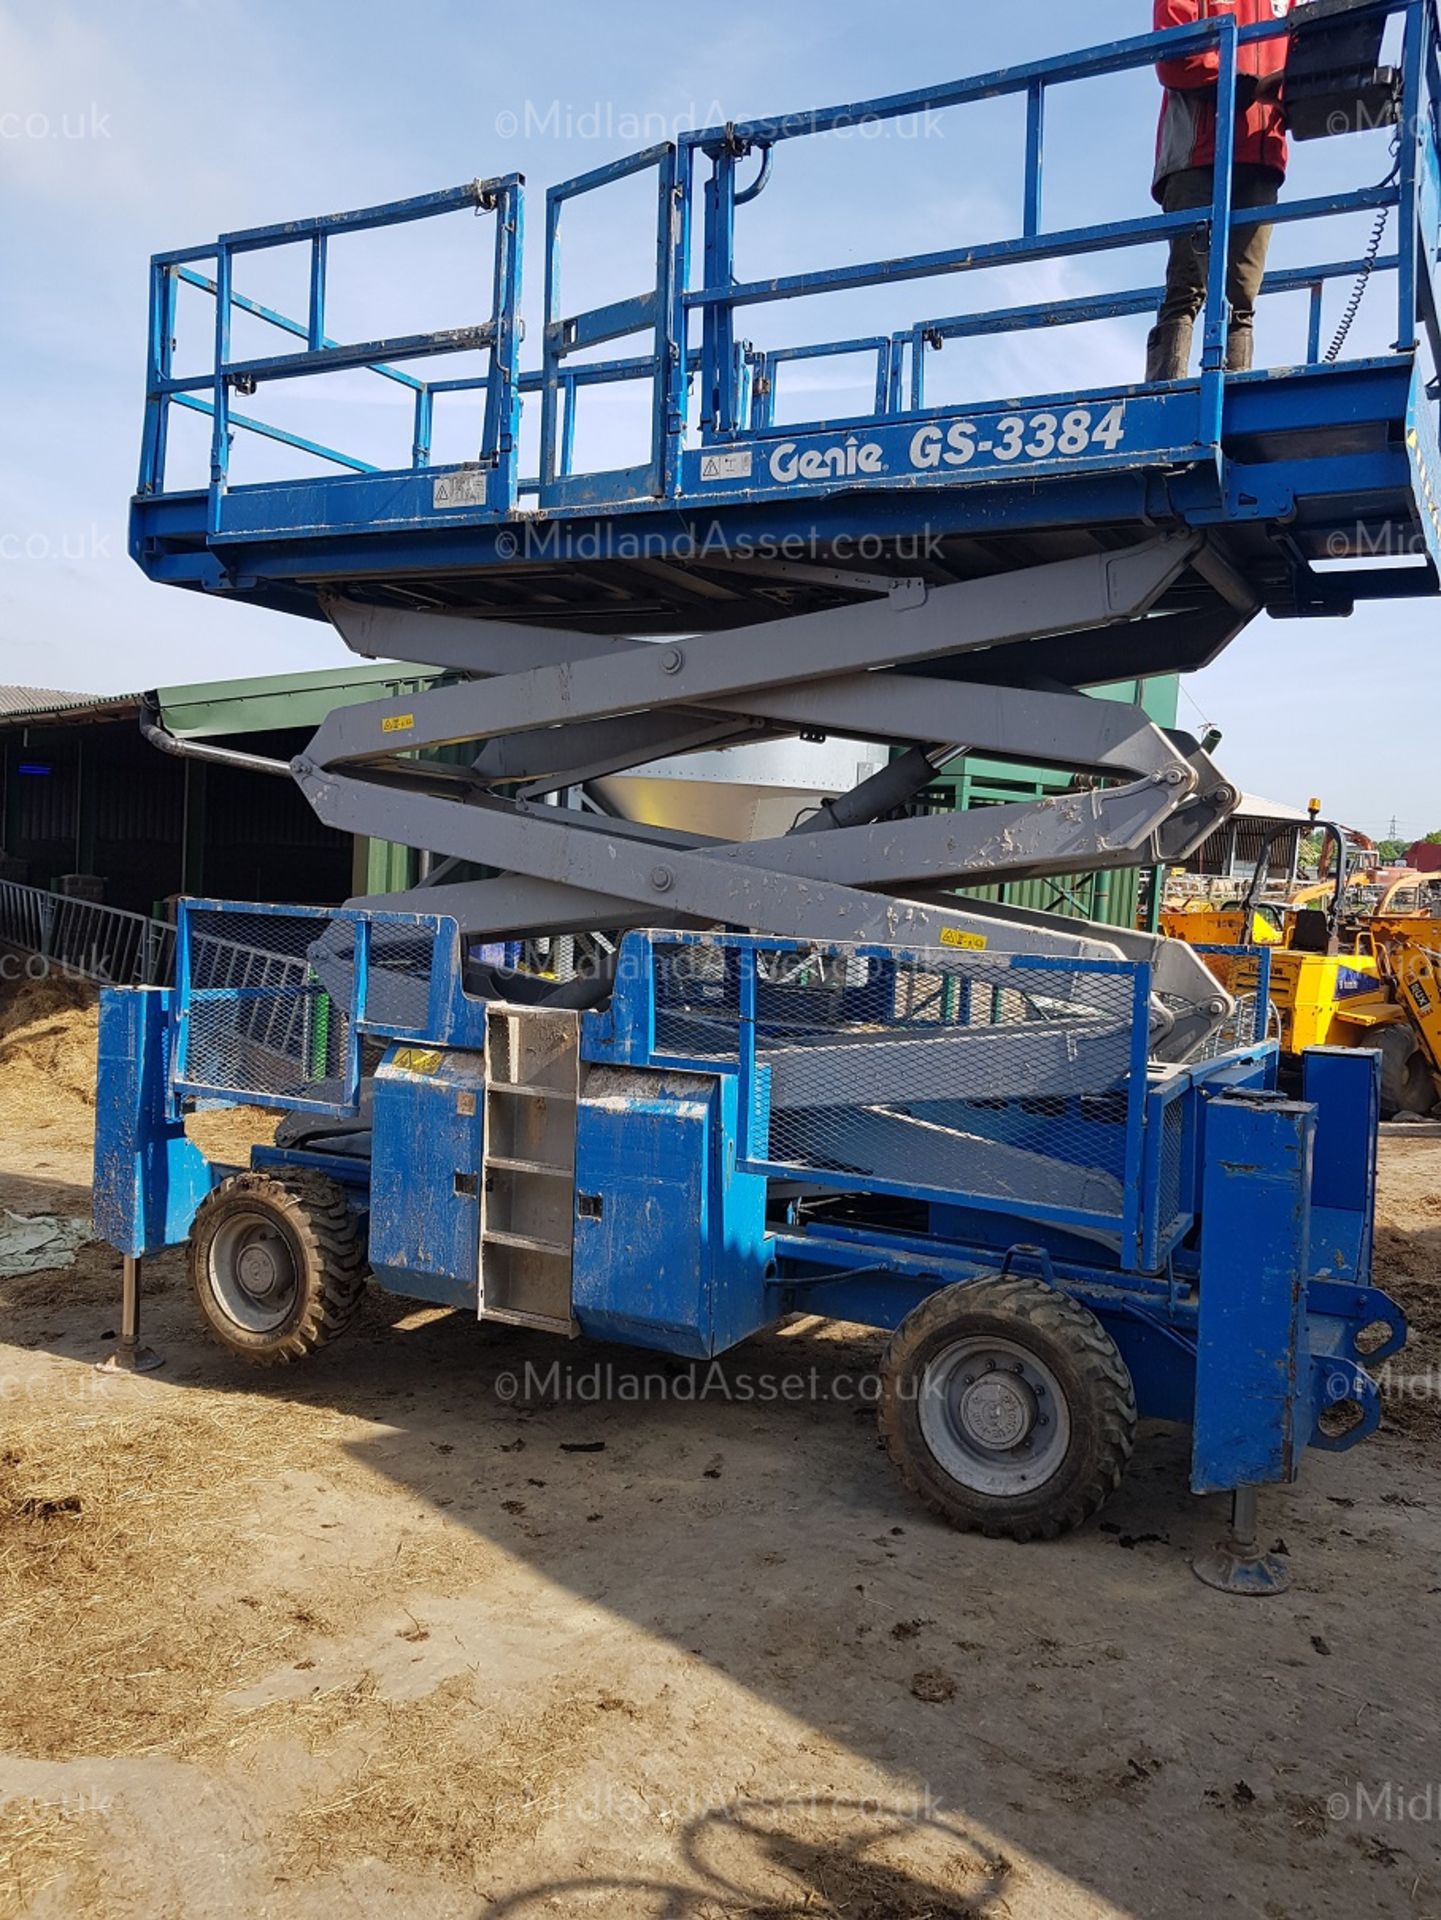 2004 GENIE GS-3384 ROUGH TERRAIN SCISSOR LIFT AUTO LEVELLING 4WD. STARTS, DRIVES AND LIFTS - Image 6 of 10